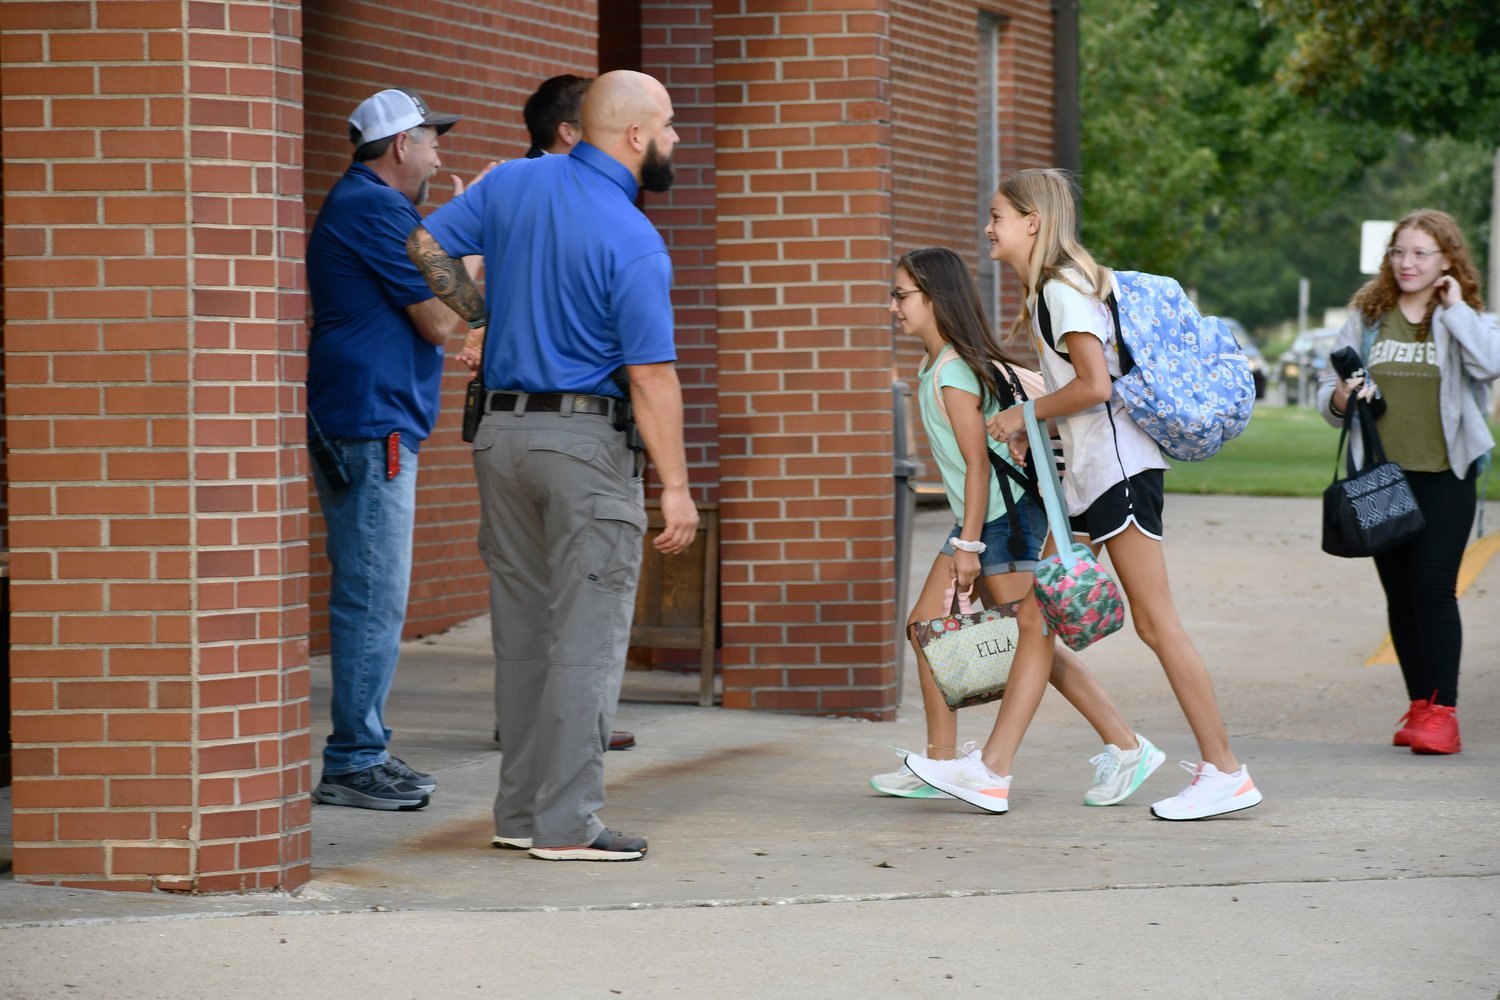 Tuesday morning, Bolivar Middle School welcomed back the sixth, seventh and eighth grade students. Cars bumper to bumper, students finding friends, being greeted by familiar faces, buses unloading, are all signs that the 2022-23 school year is underway.